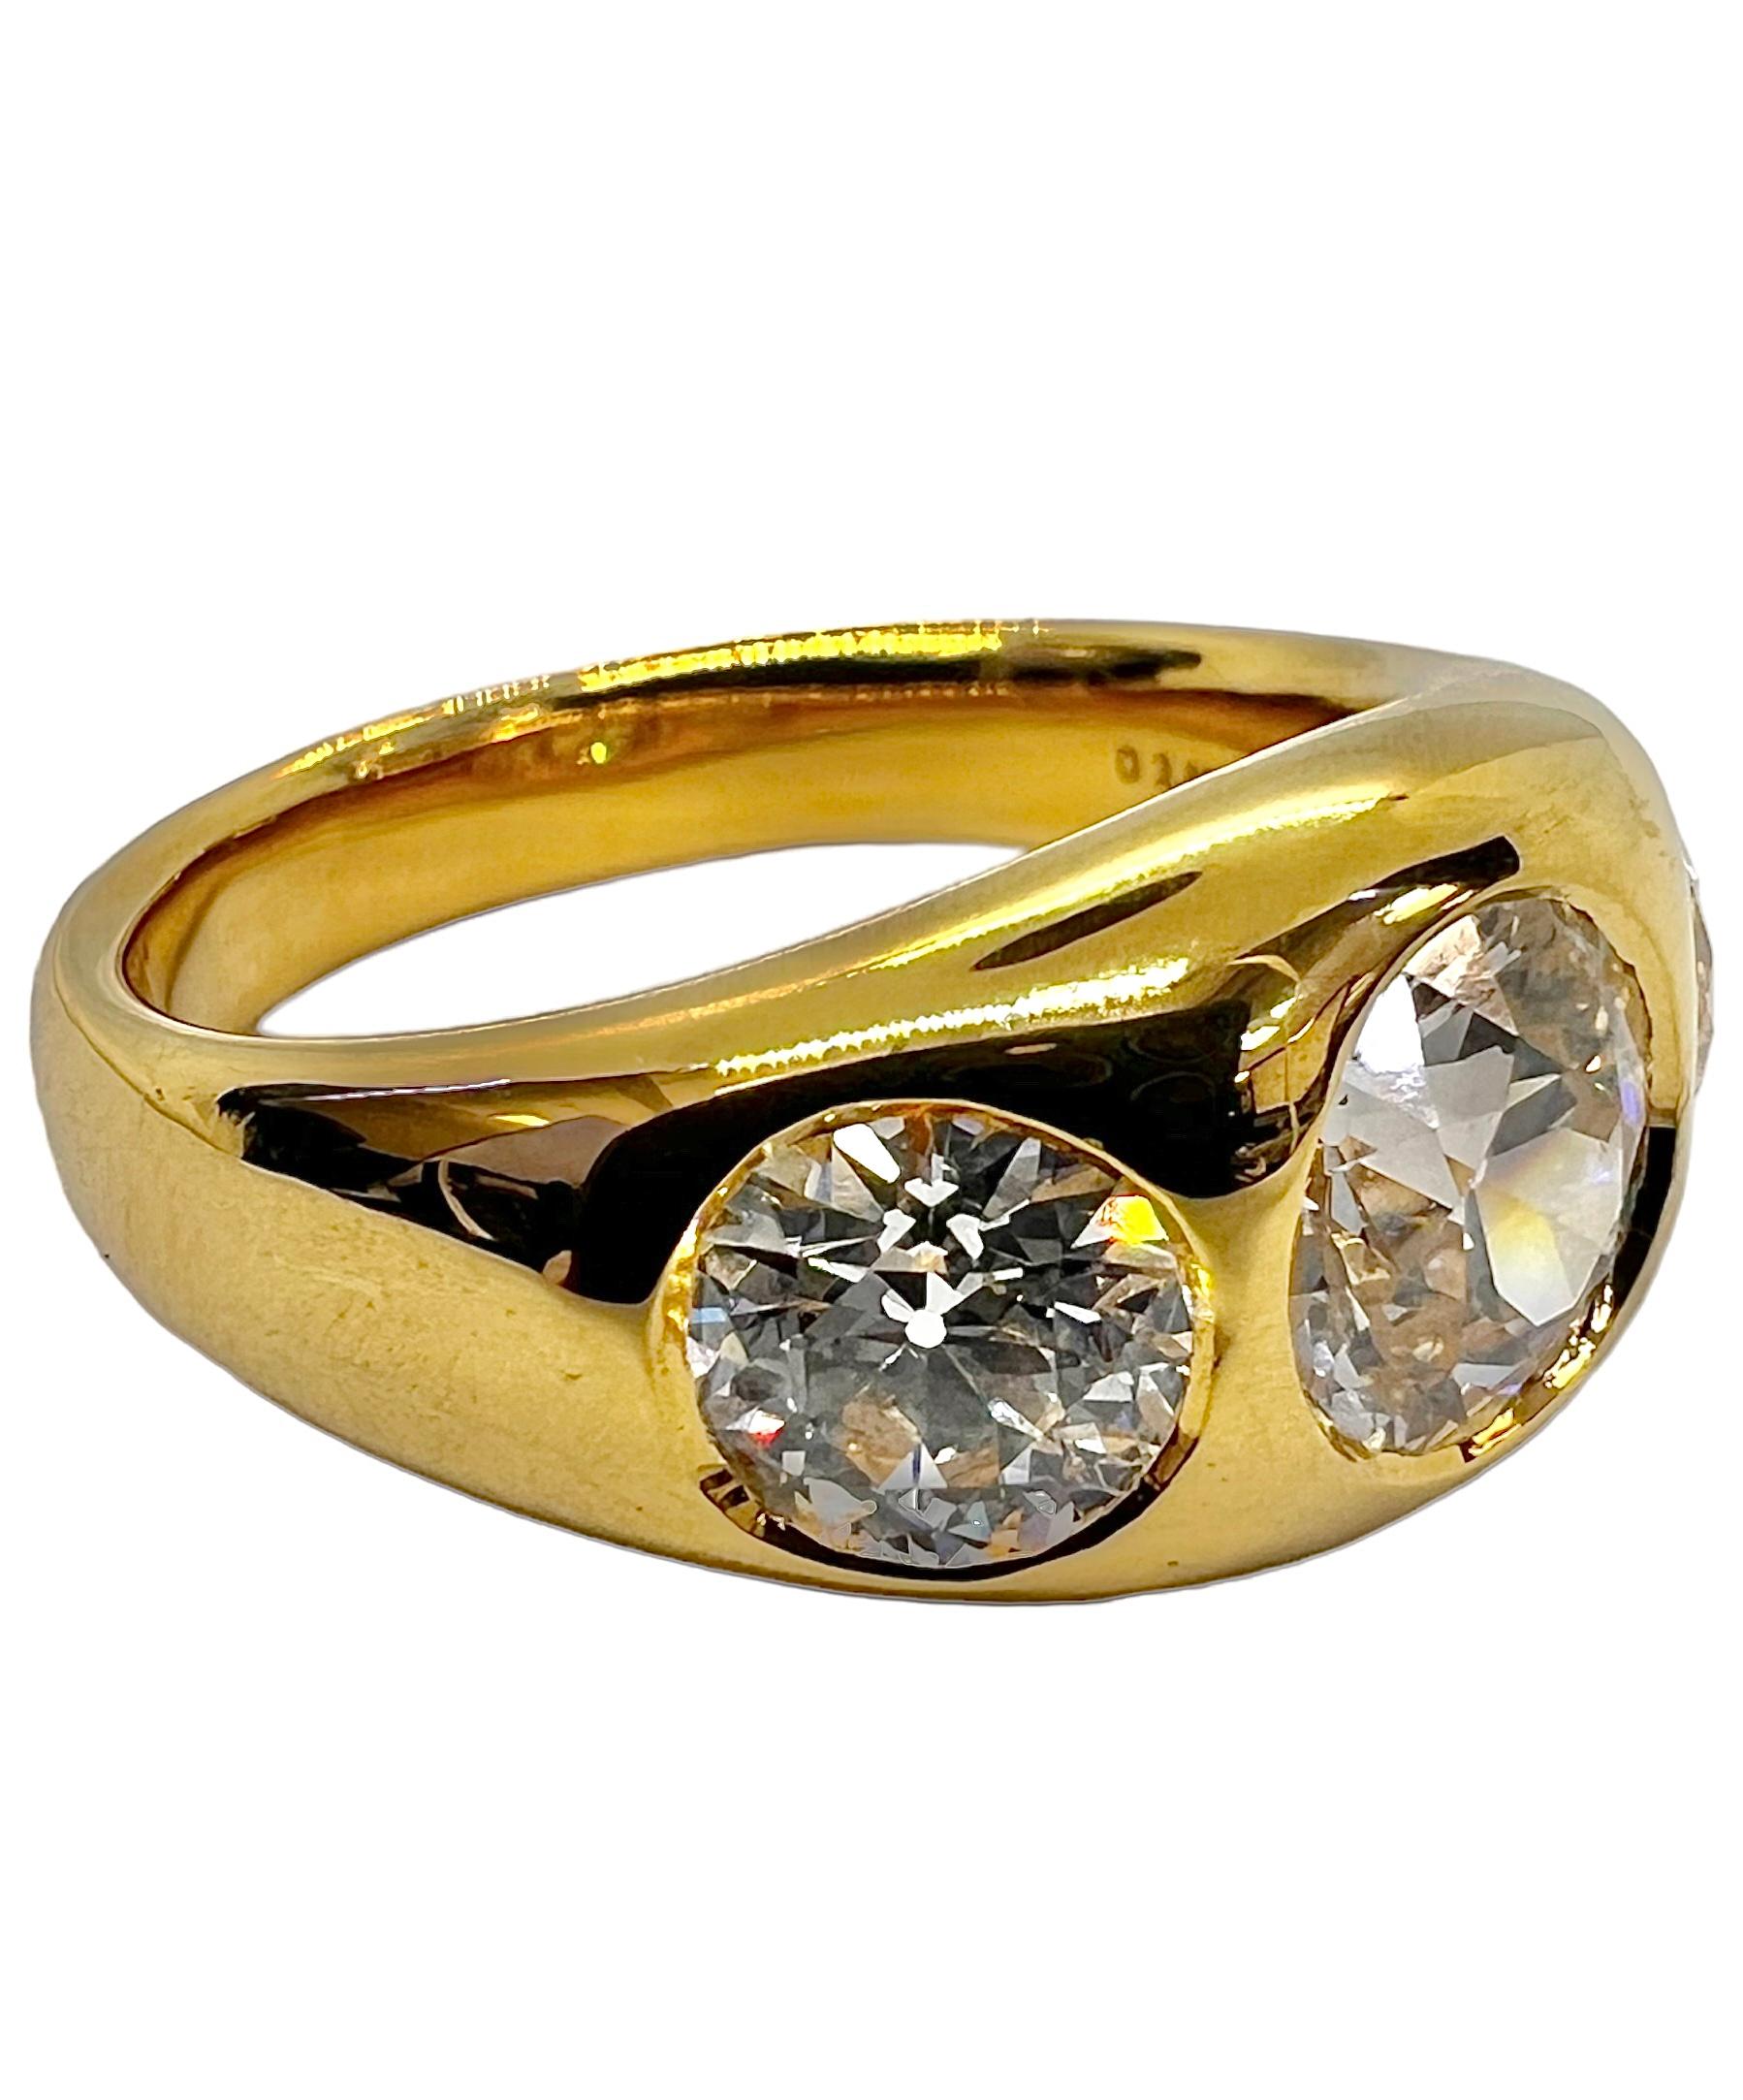 Round Cut Sophia D. 1.30 Carat Diamond Ring in 18K Yellow Gold For Sale